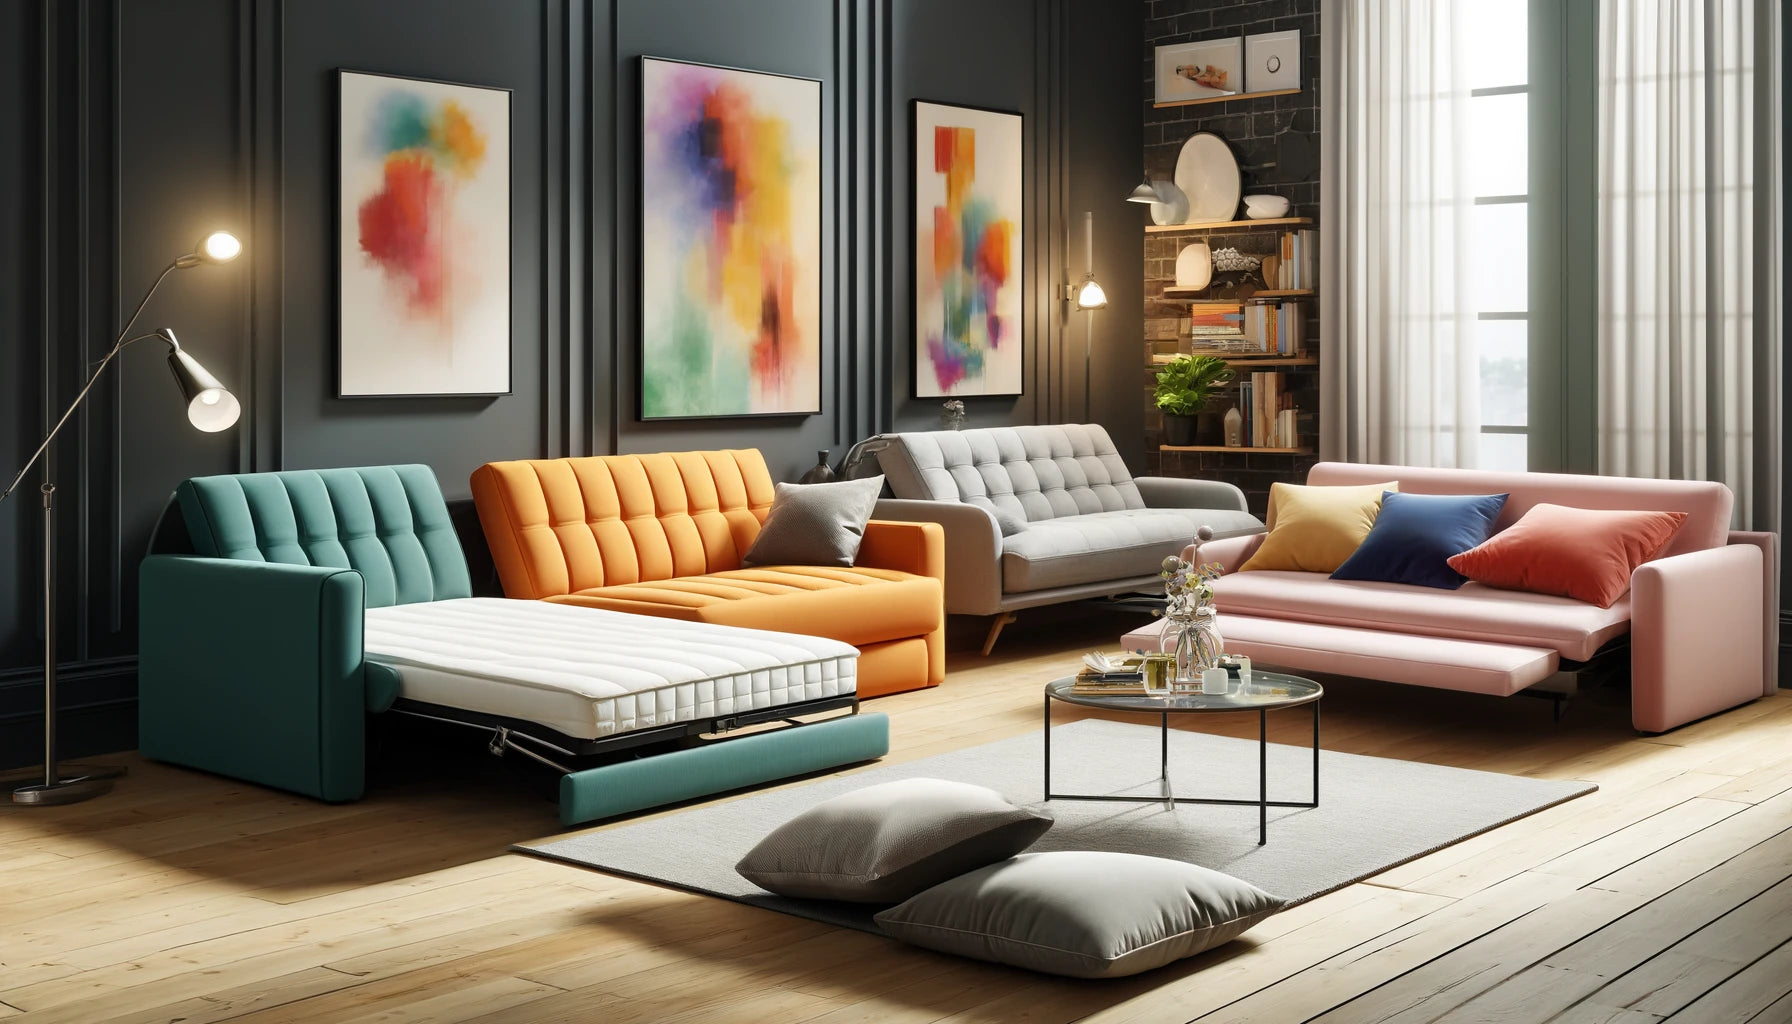 How to choose the right Sofabed?